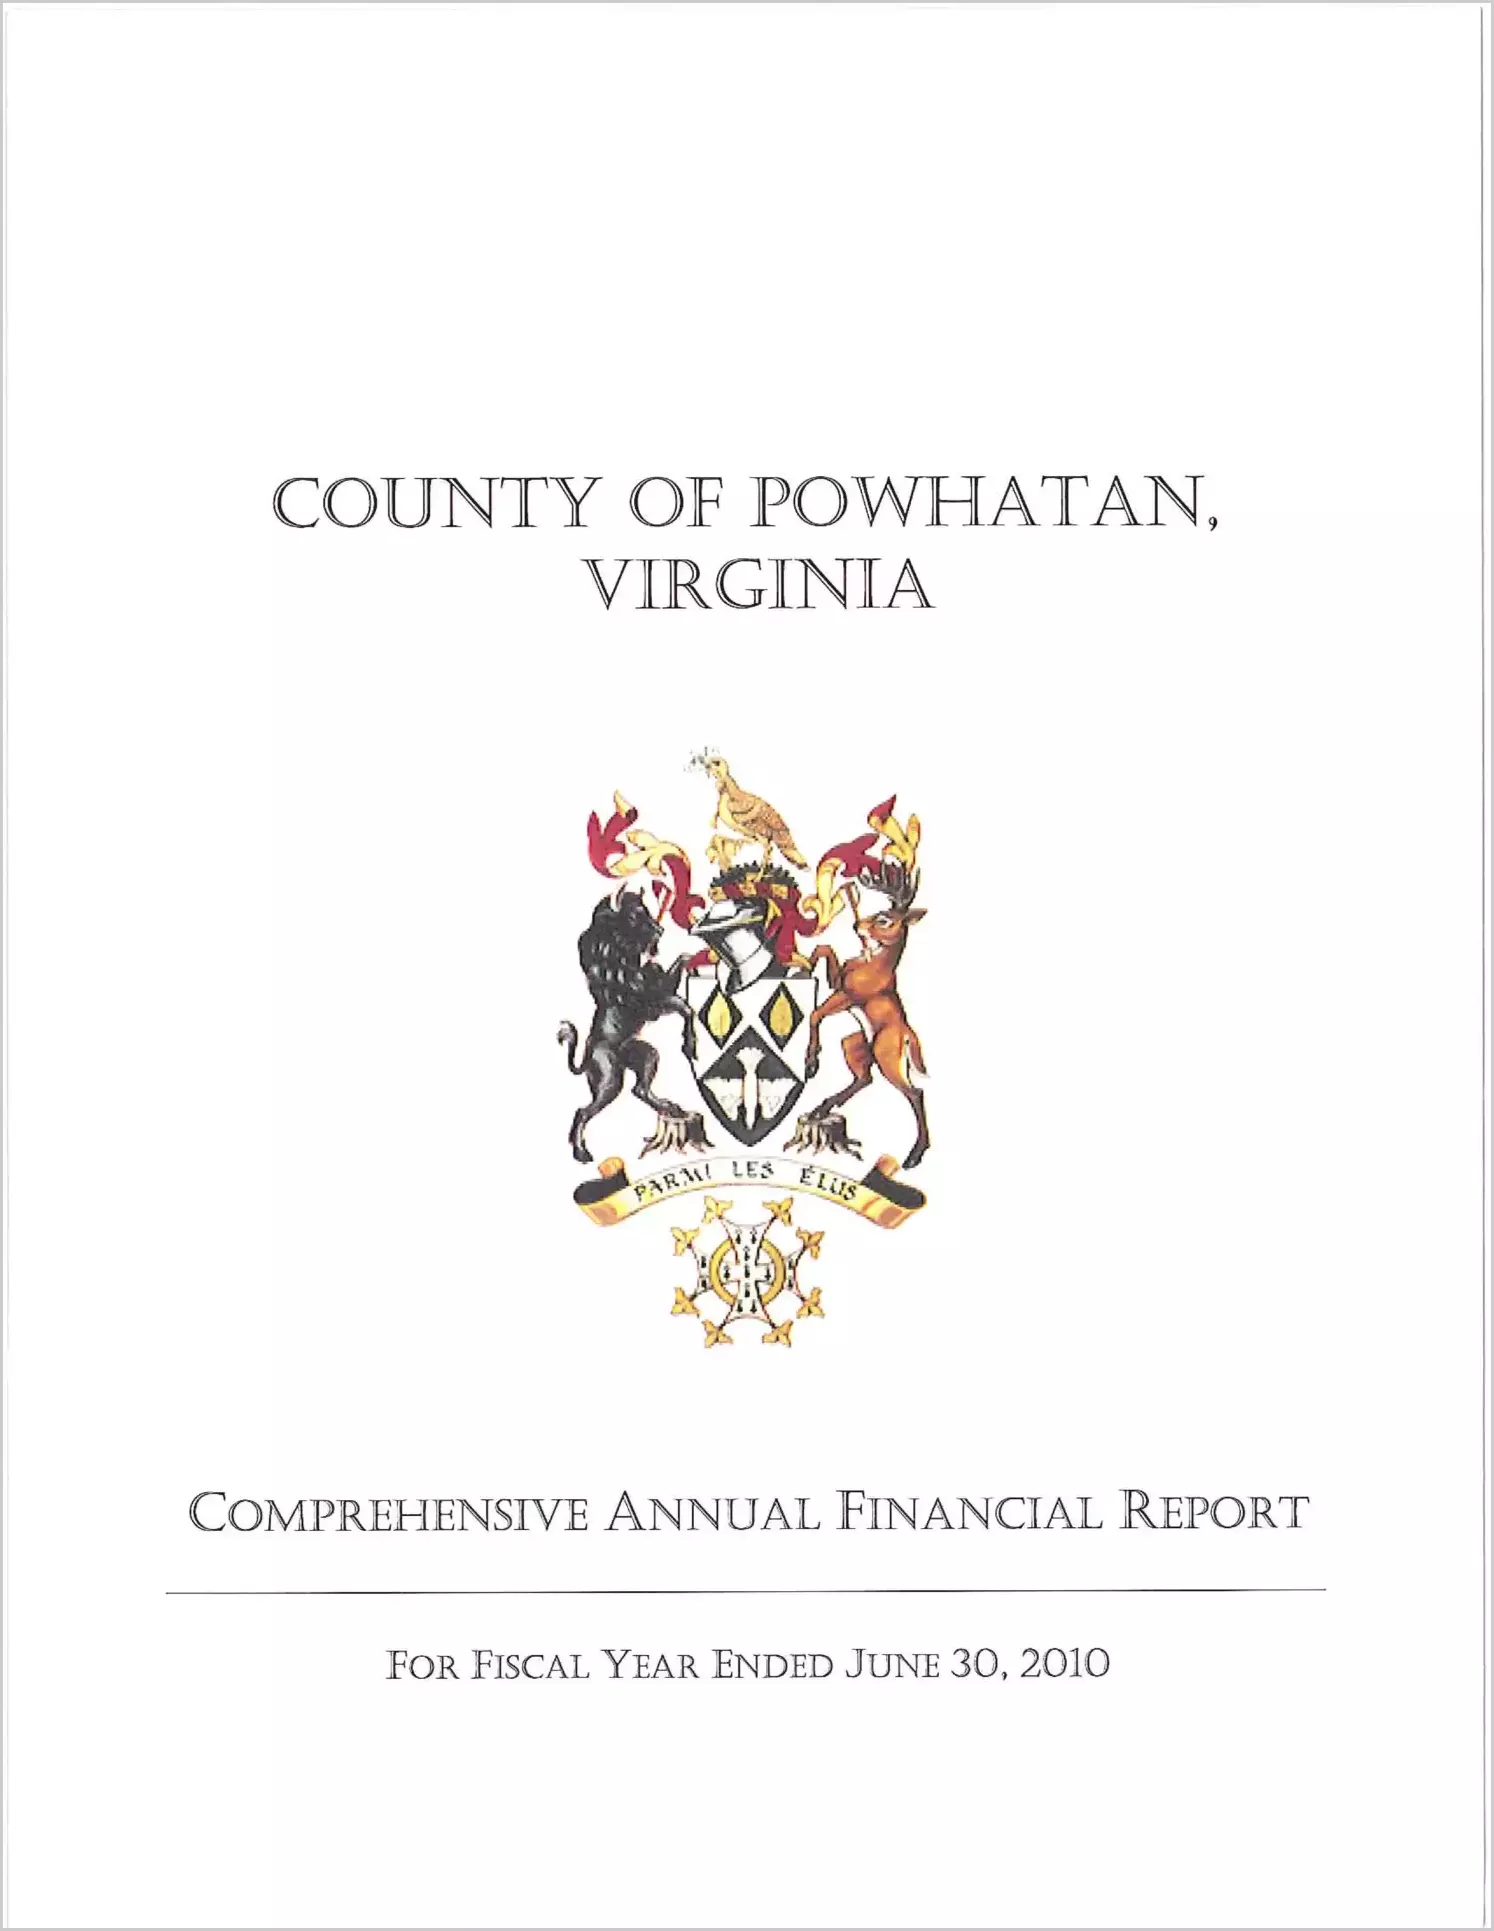 2010 Annual Financial Report for County of Powhatan